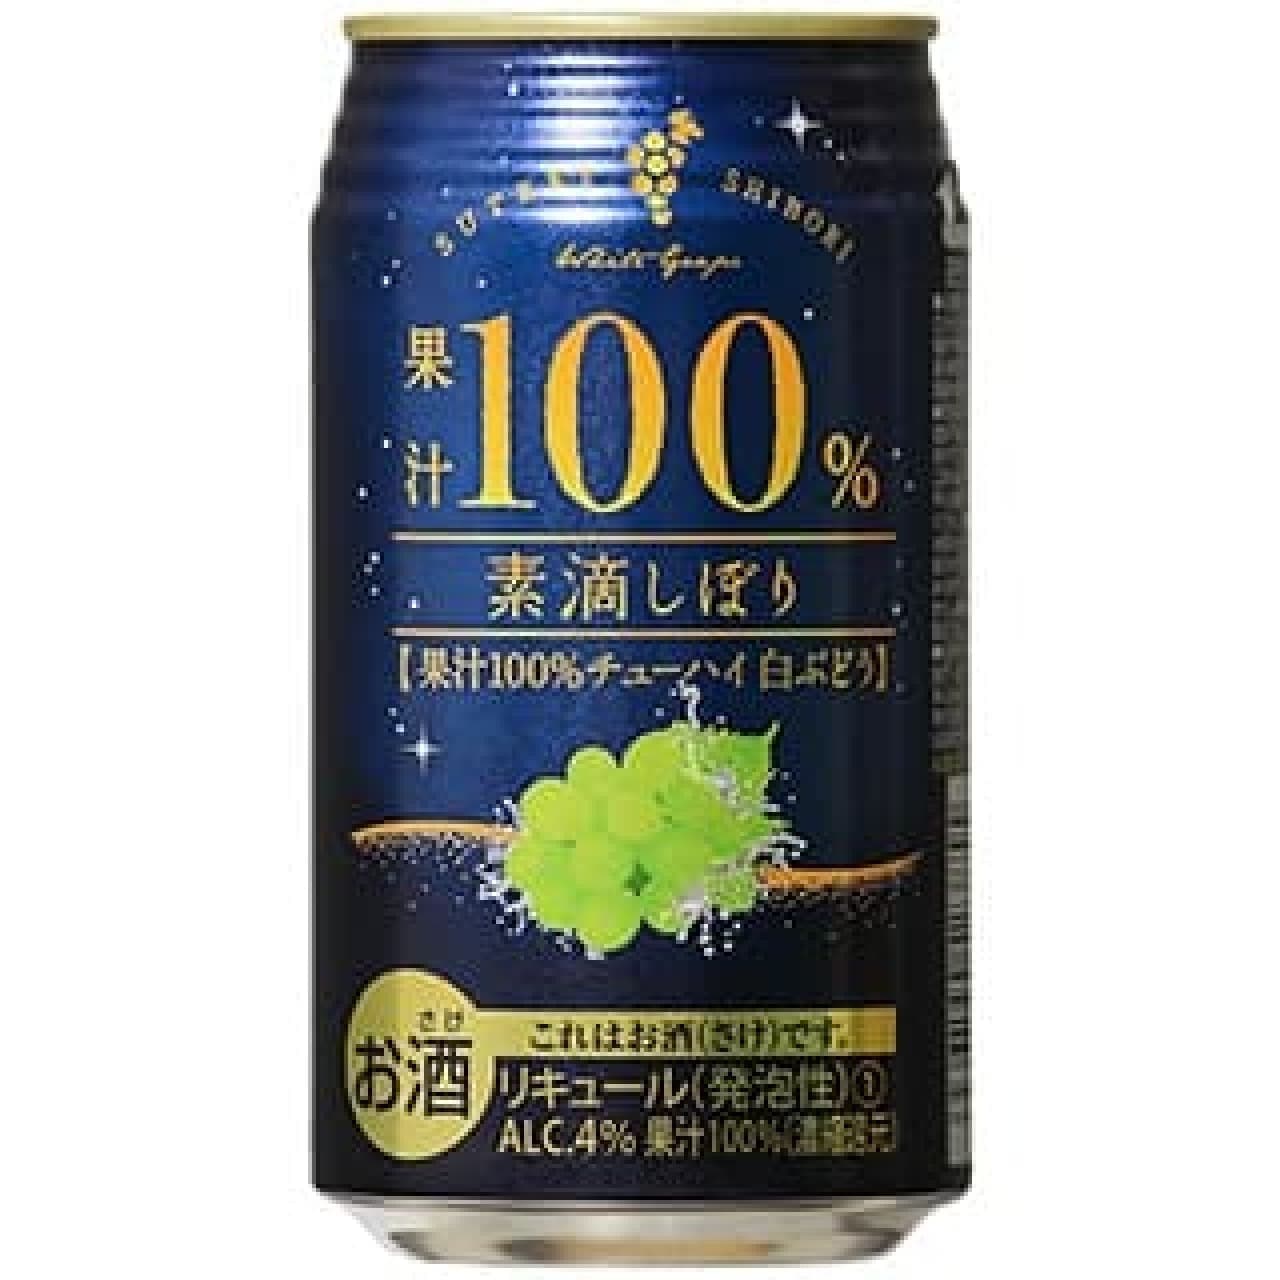 7-ELEVEN "100% squeezed juice, Chuhai white grape 350ml can"